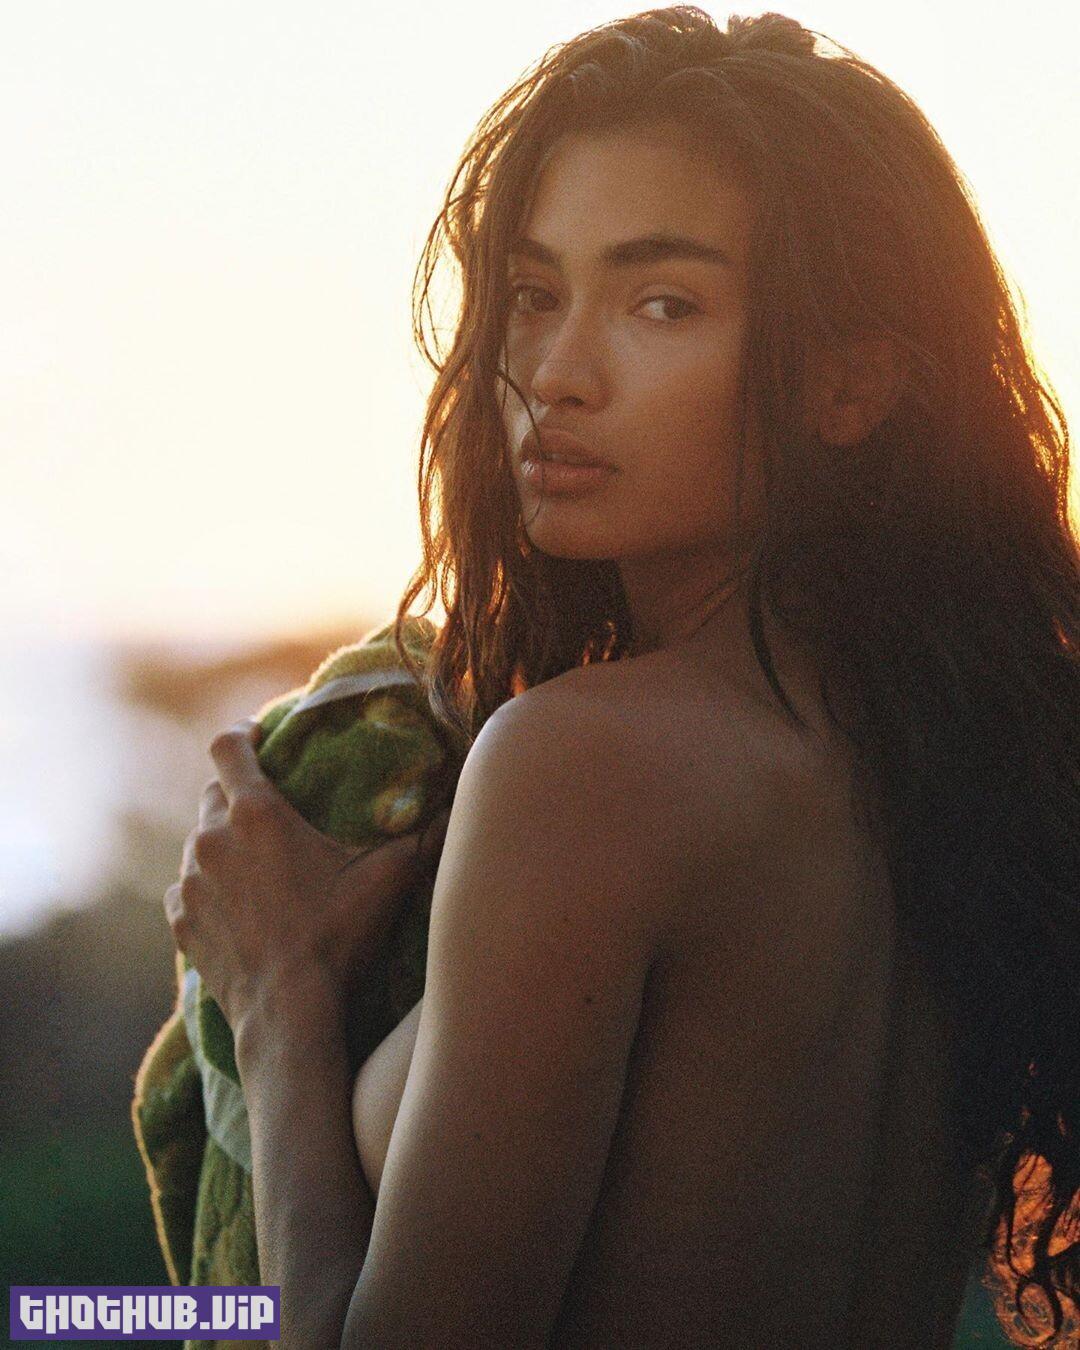 1677126968 773 Kelly Gale Nude Deleted Pics 6 Photos